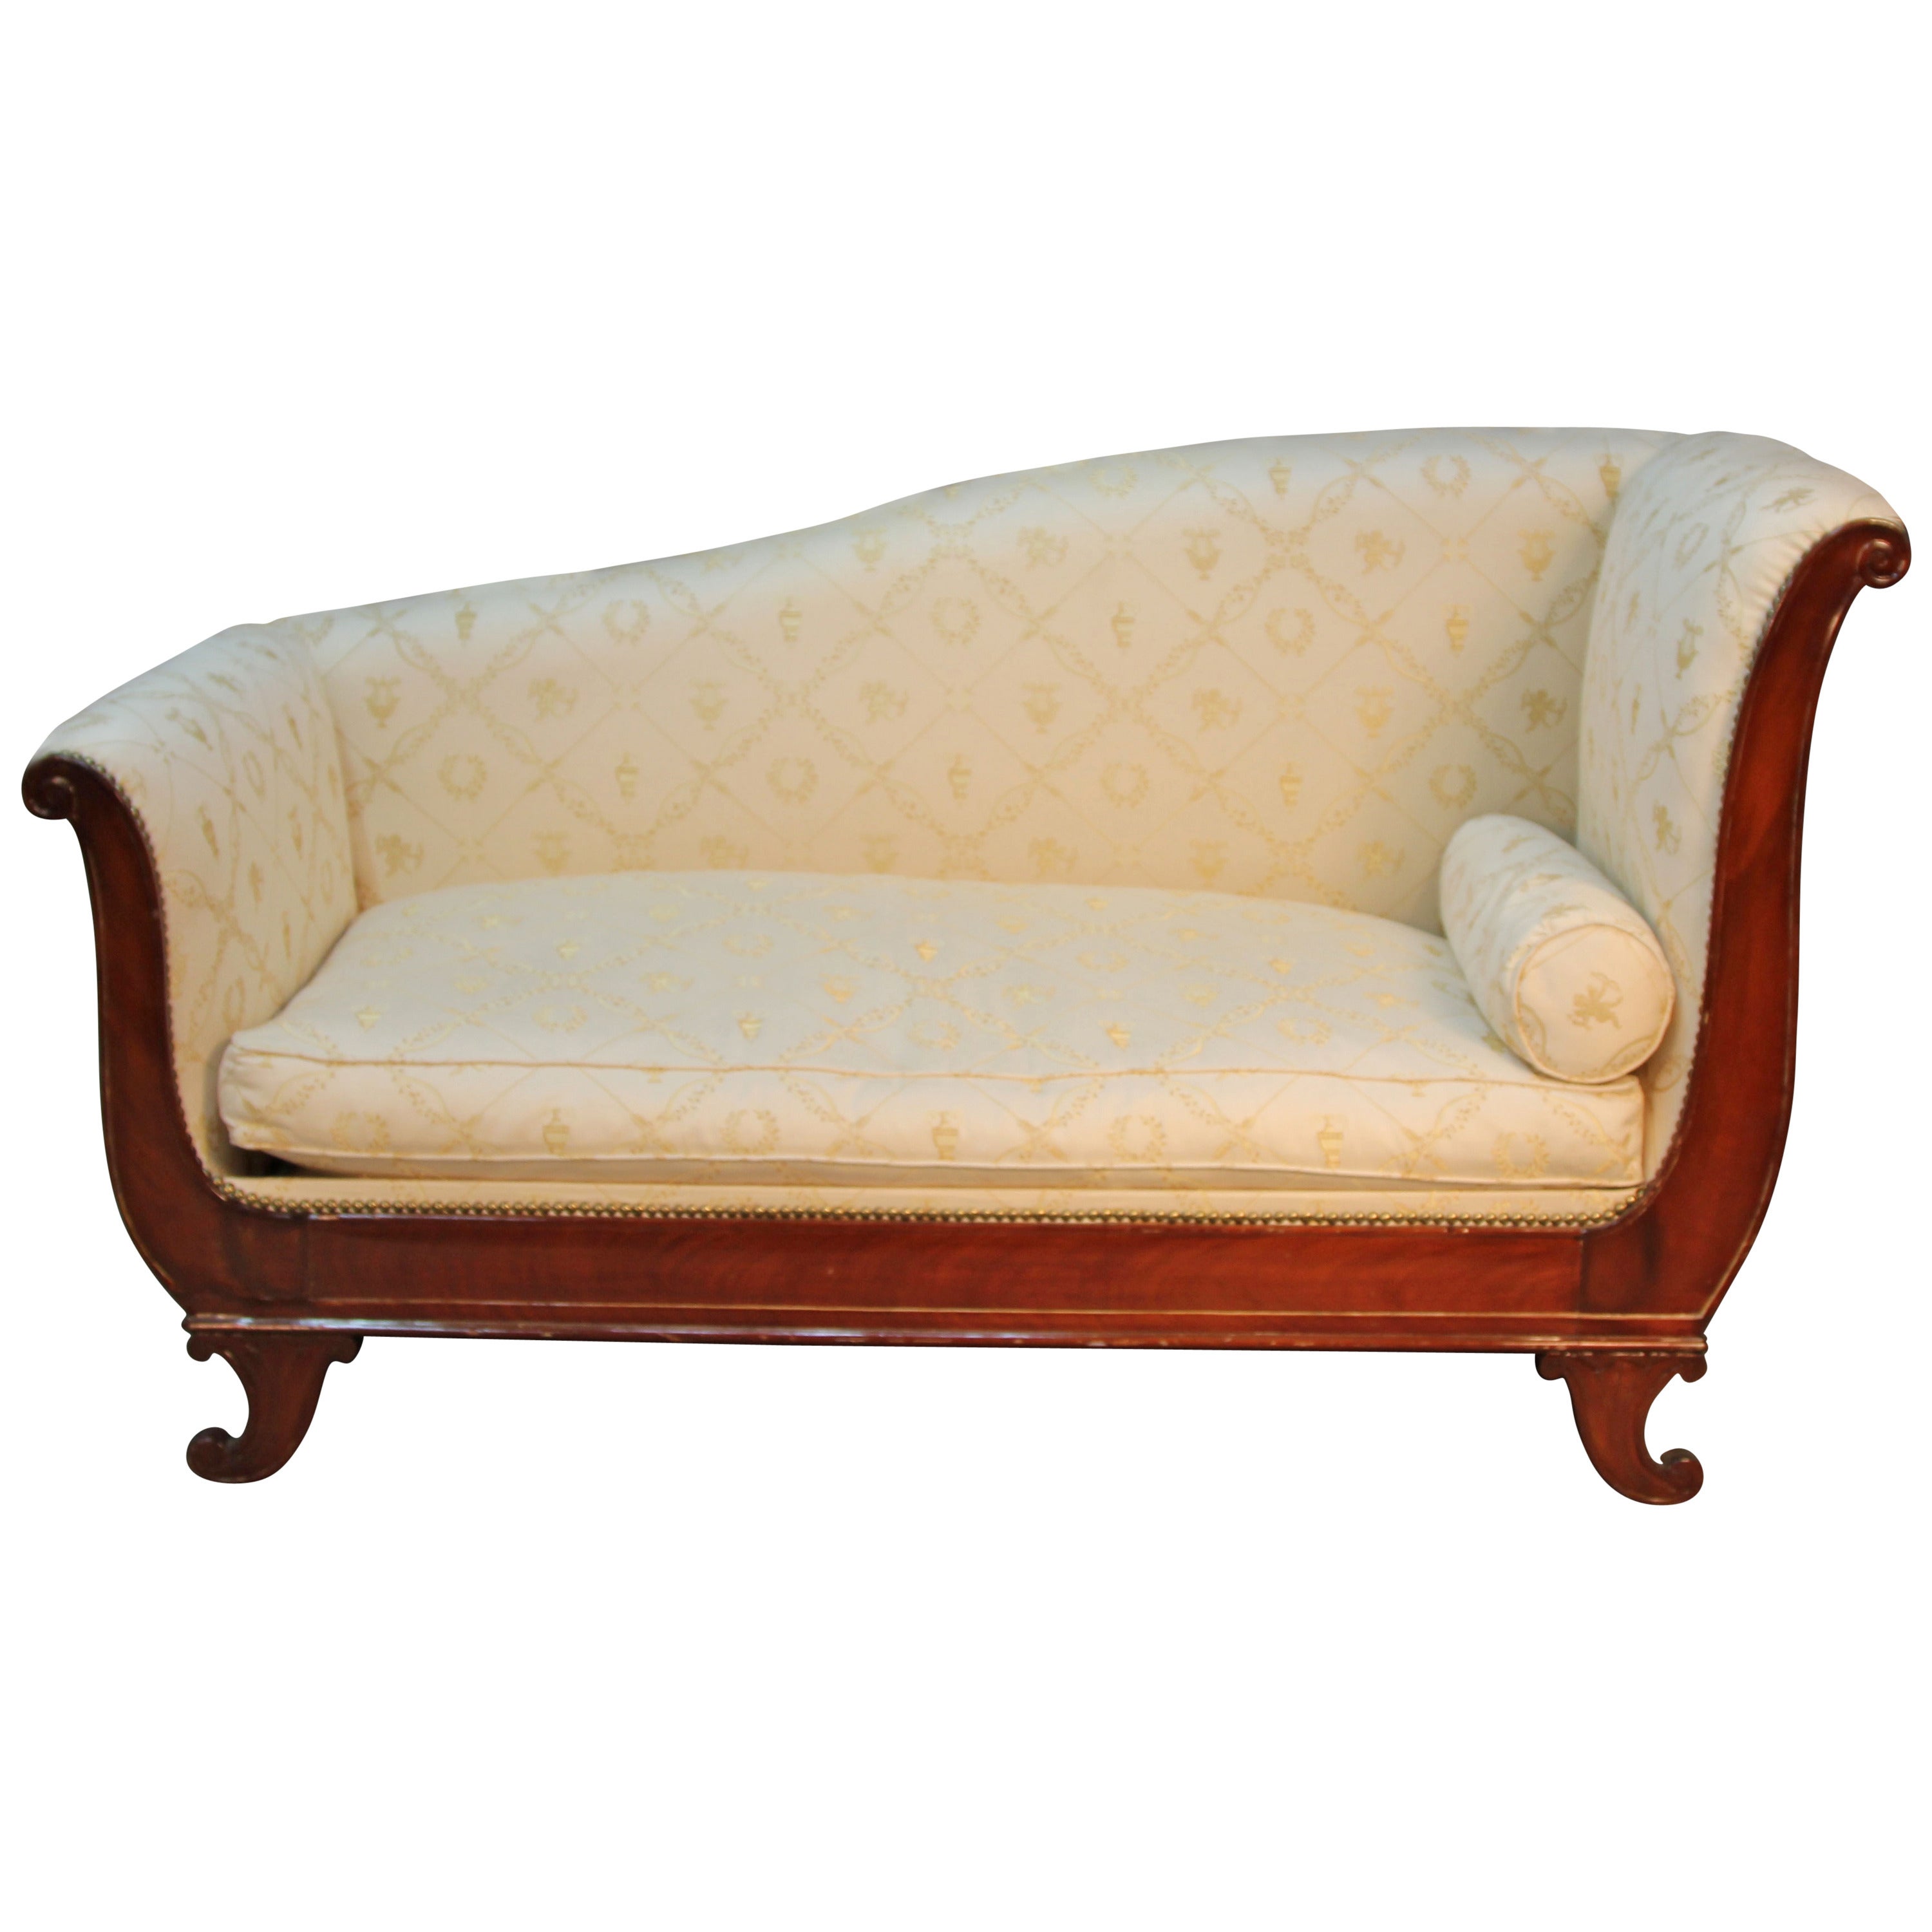 French Empire Sofa For Sale